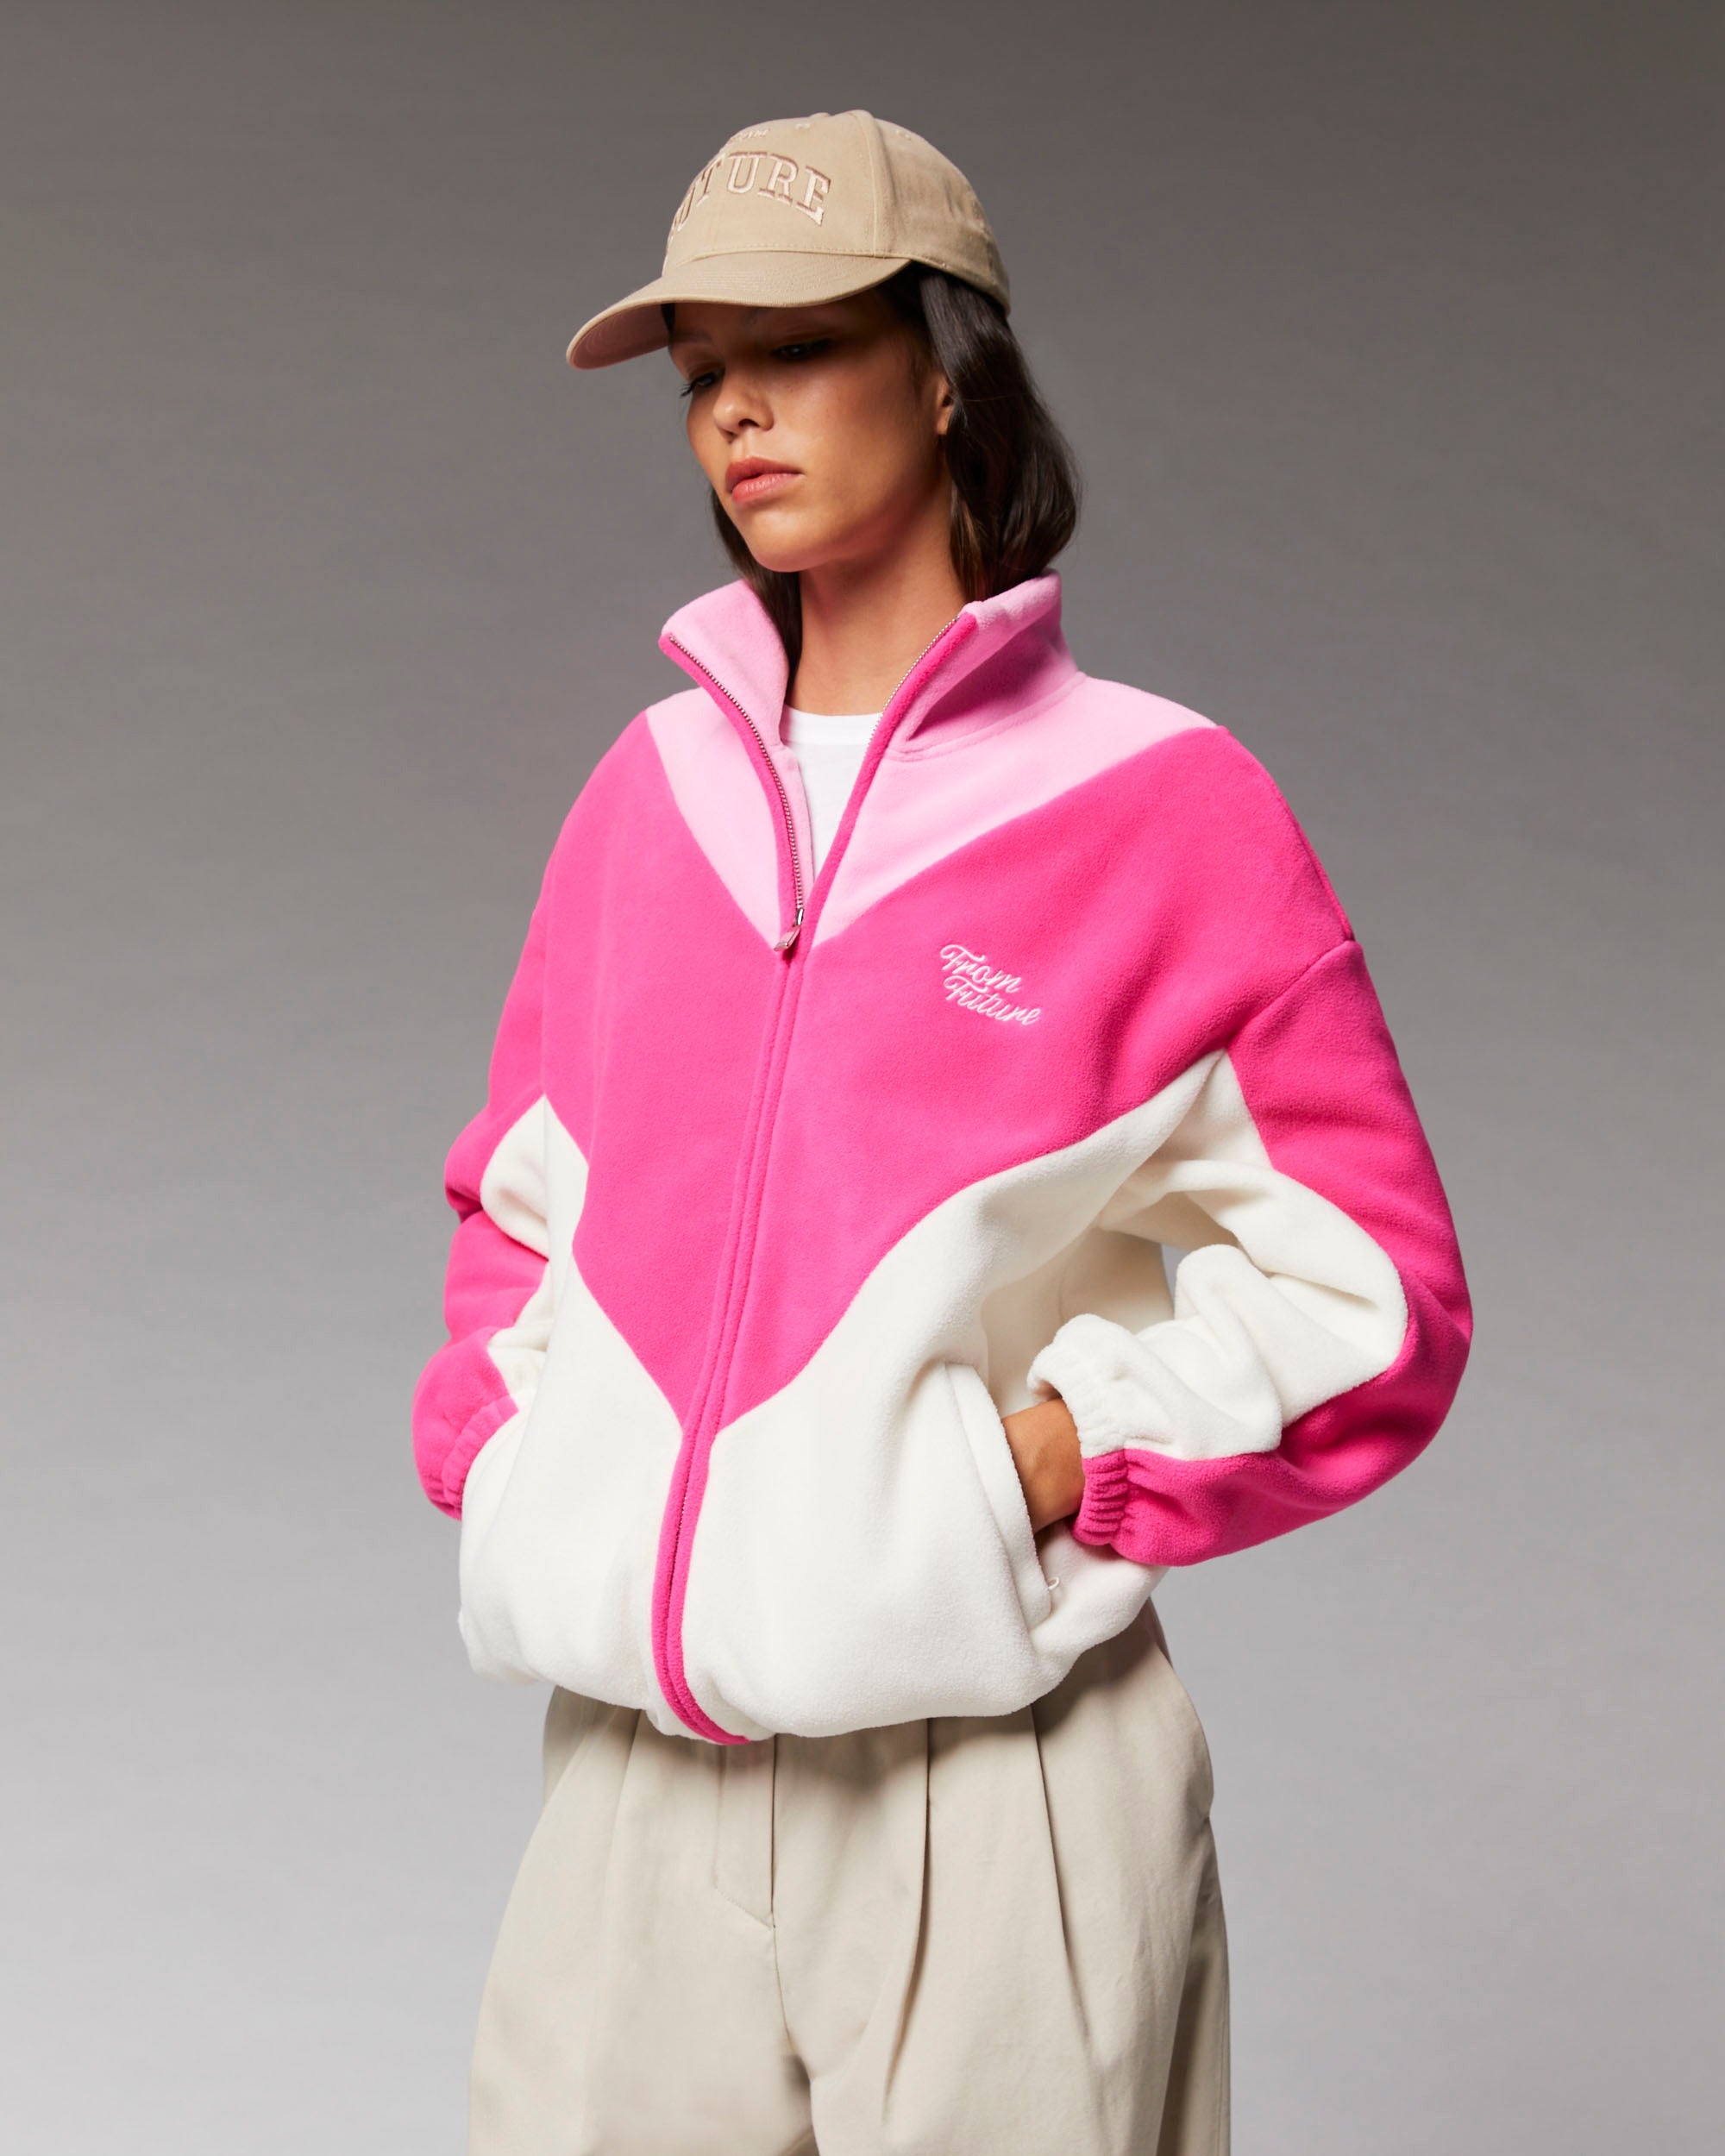 Pink Fleece Jackets and More